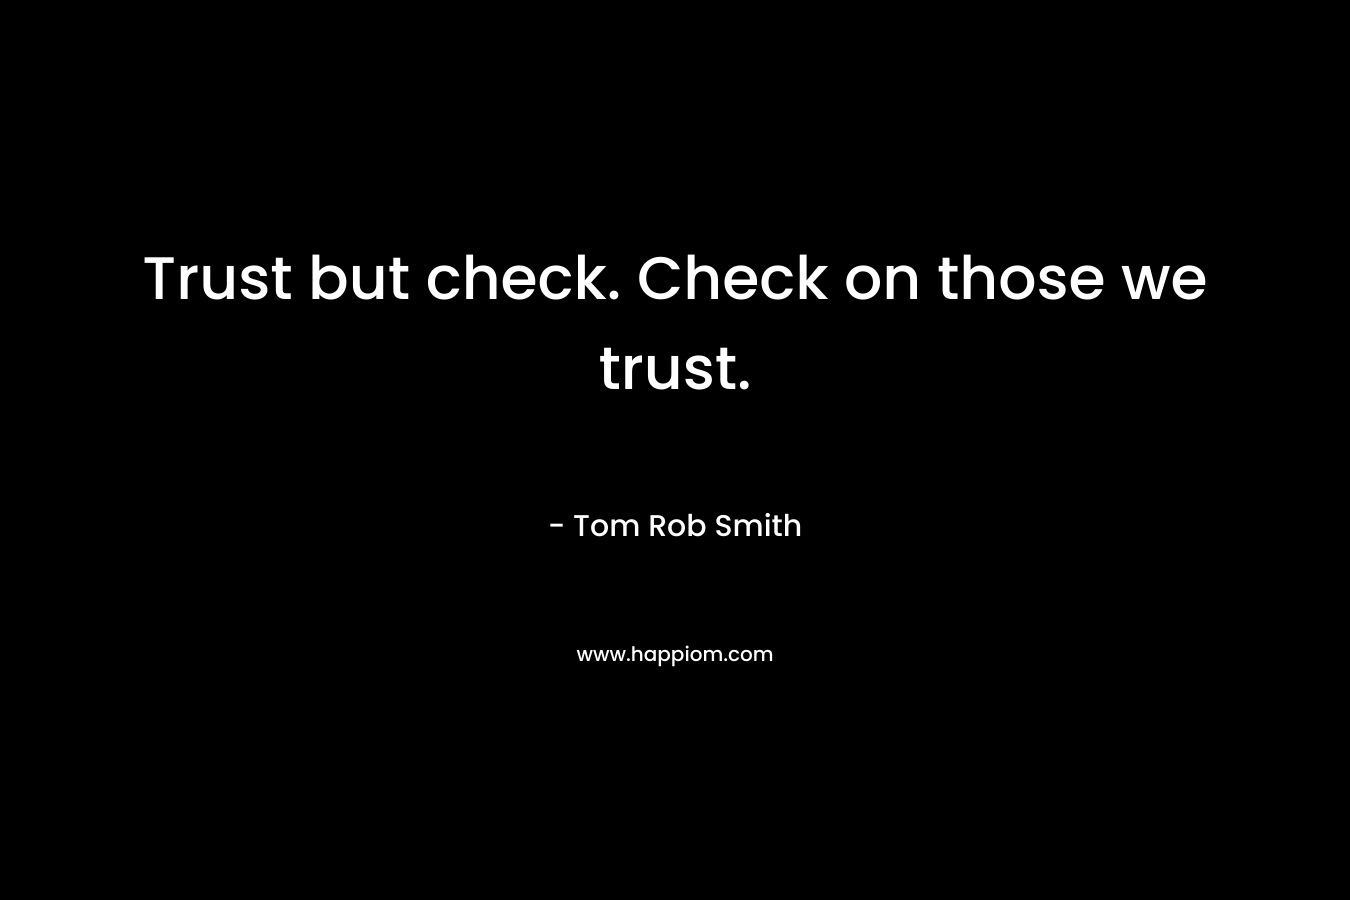 Trust but check. Check on those we trust.